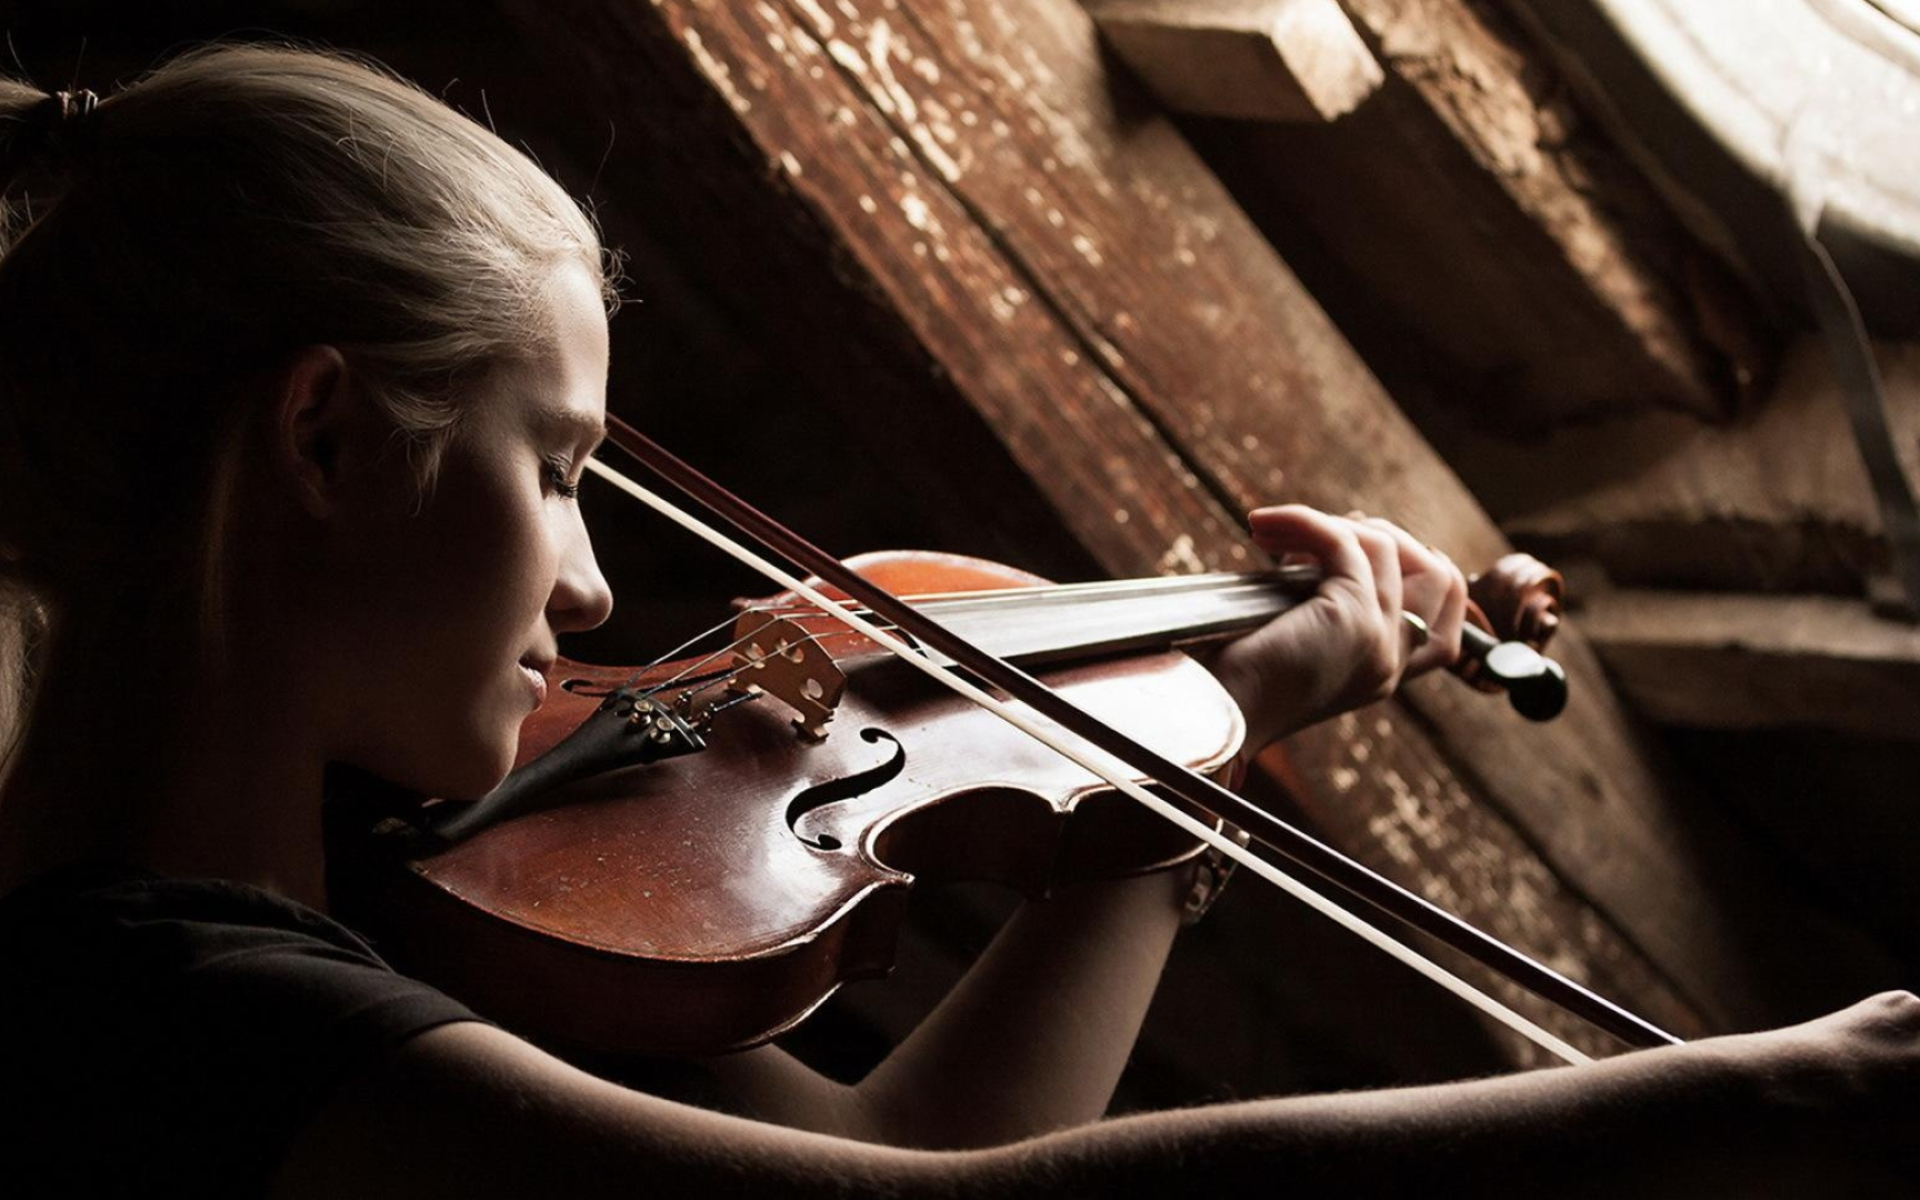 Violin: Learning To Play The Violin, Classical Music And Instrument, Musical Lessons. 1920x1200 HD Wallpaper.